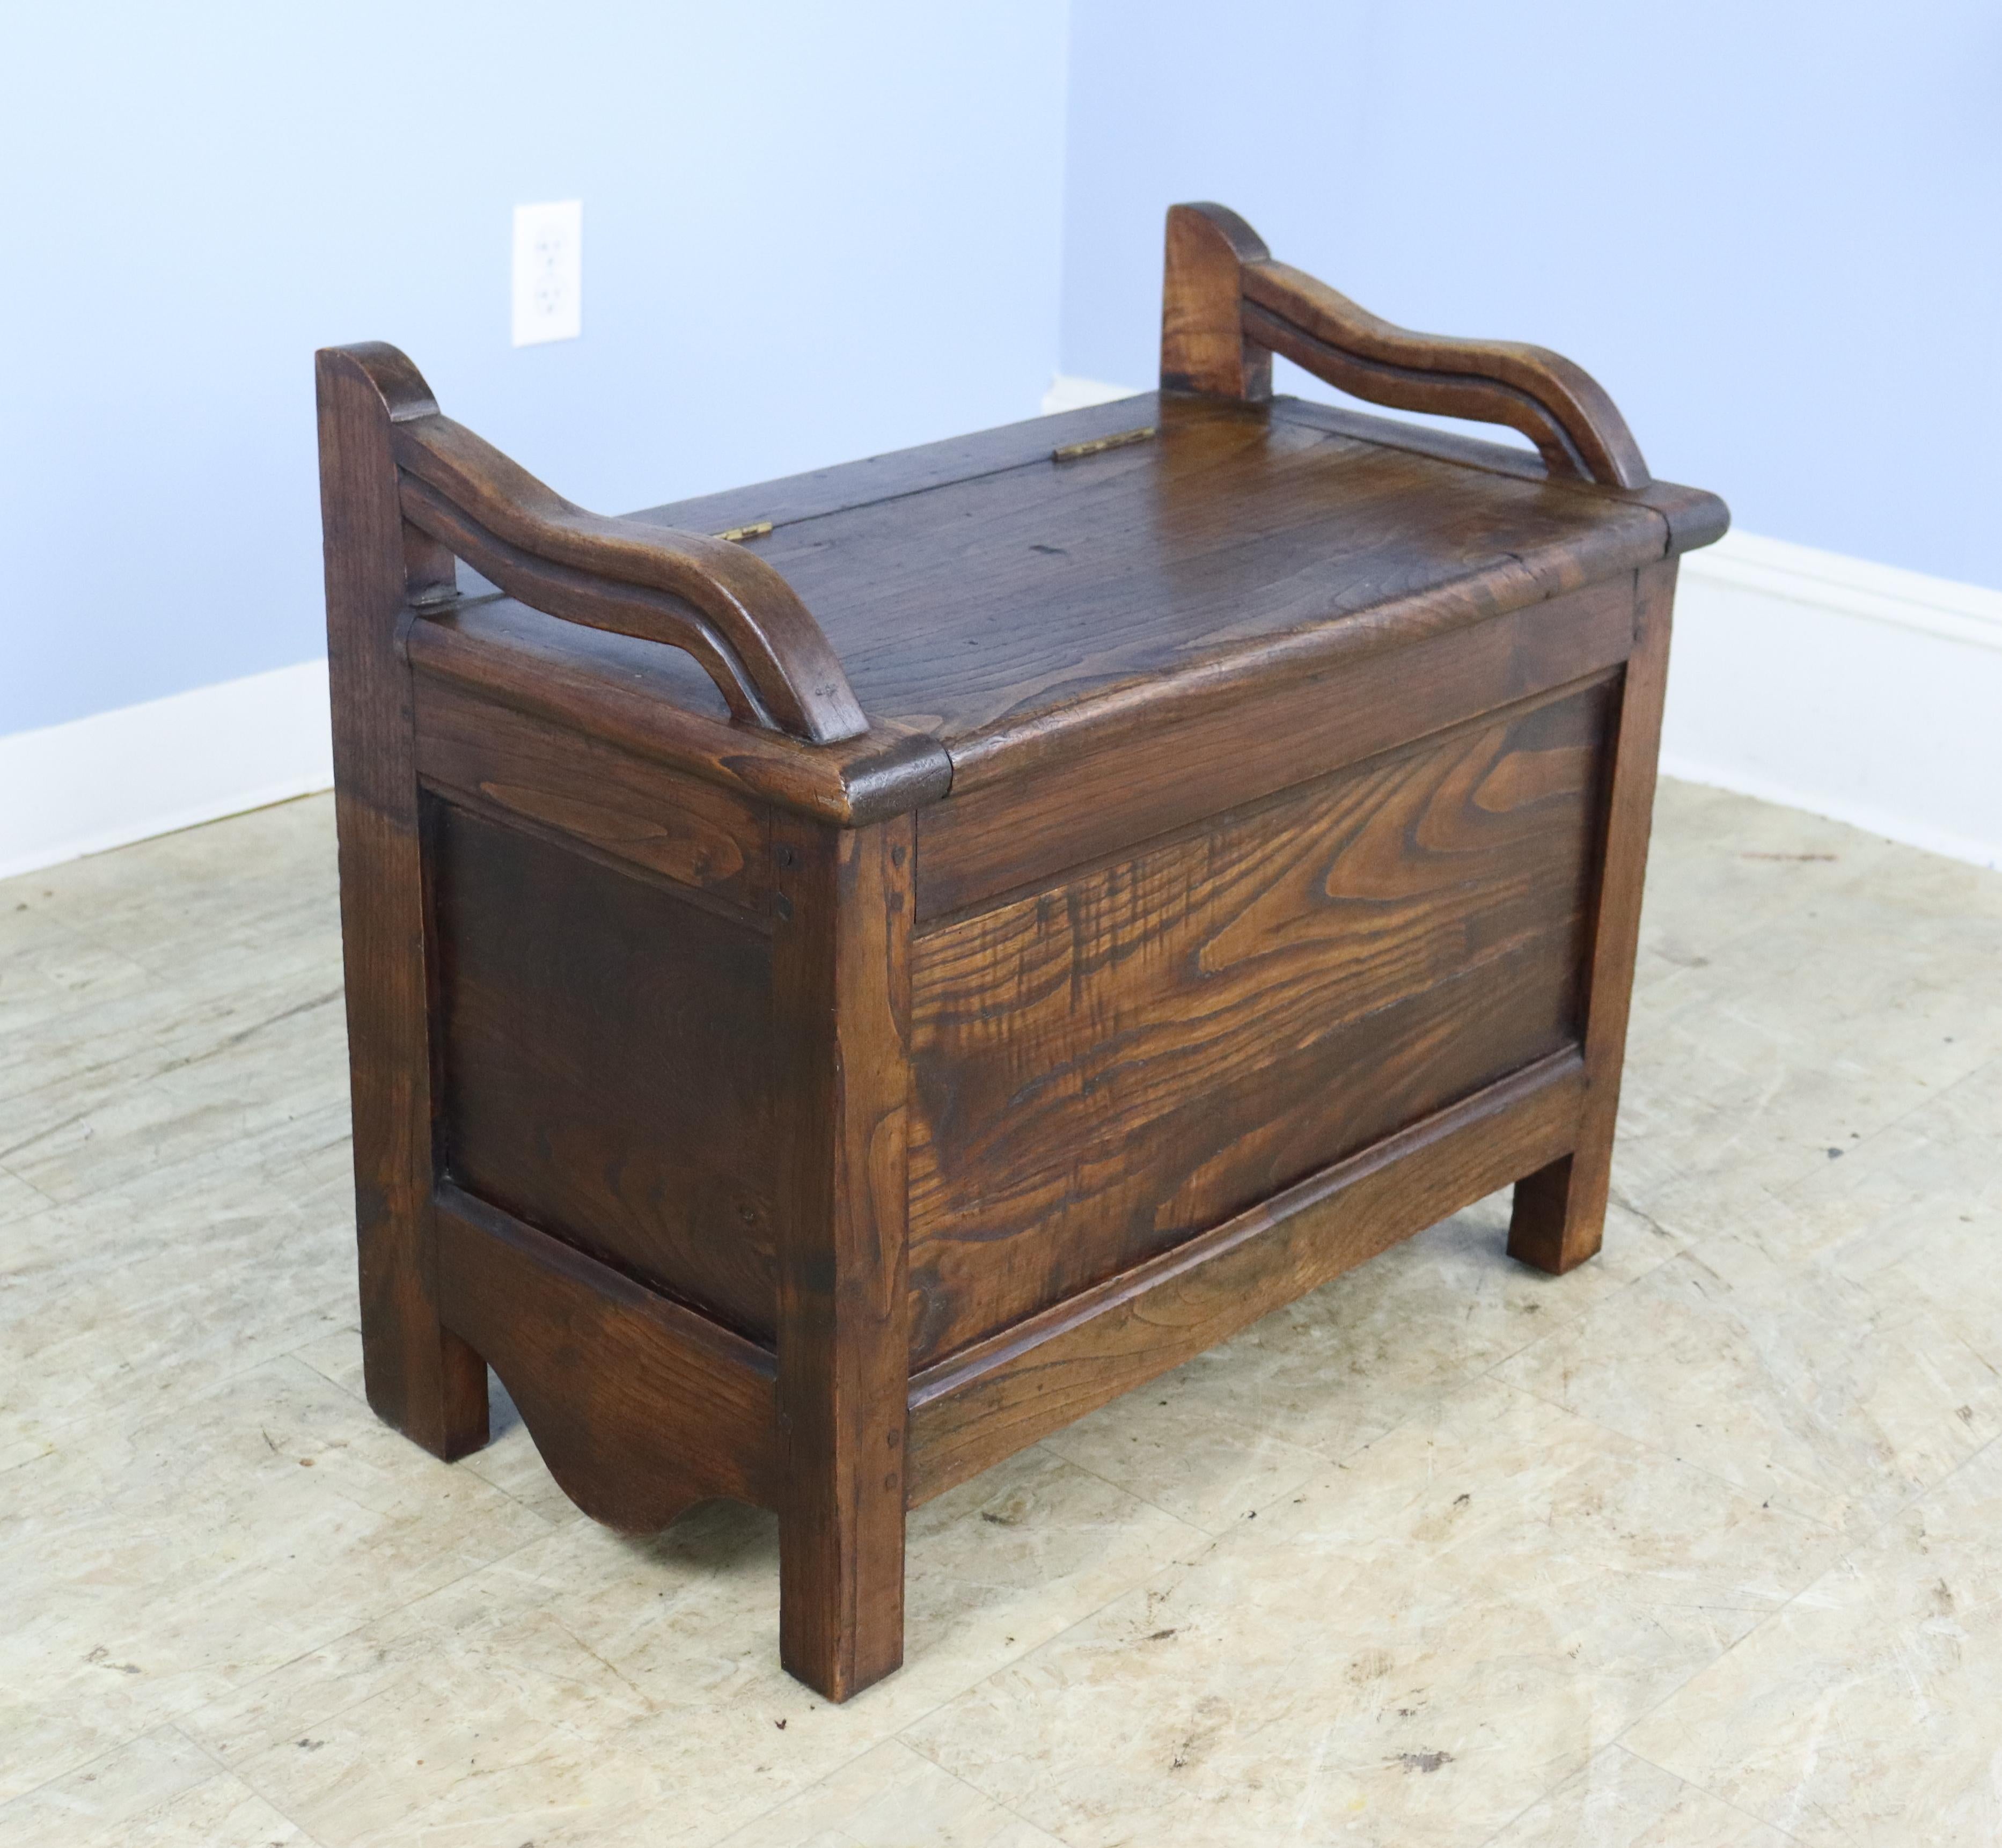 A small fireside seat in warm chestnut with a flip up top that reveals an good storage space.  Attractive curved arms  add a note of charm.  If you are in need of two, we have a similar piece with a side drawer, reference #0623-016B.